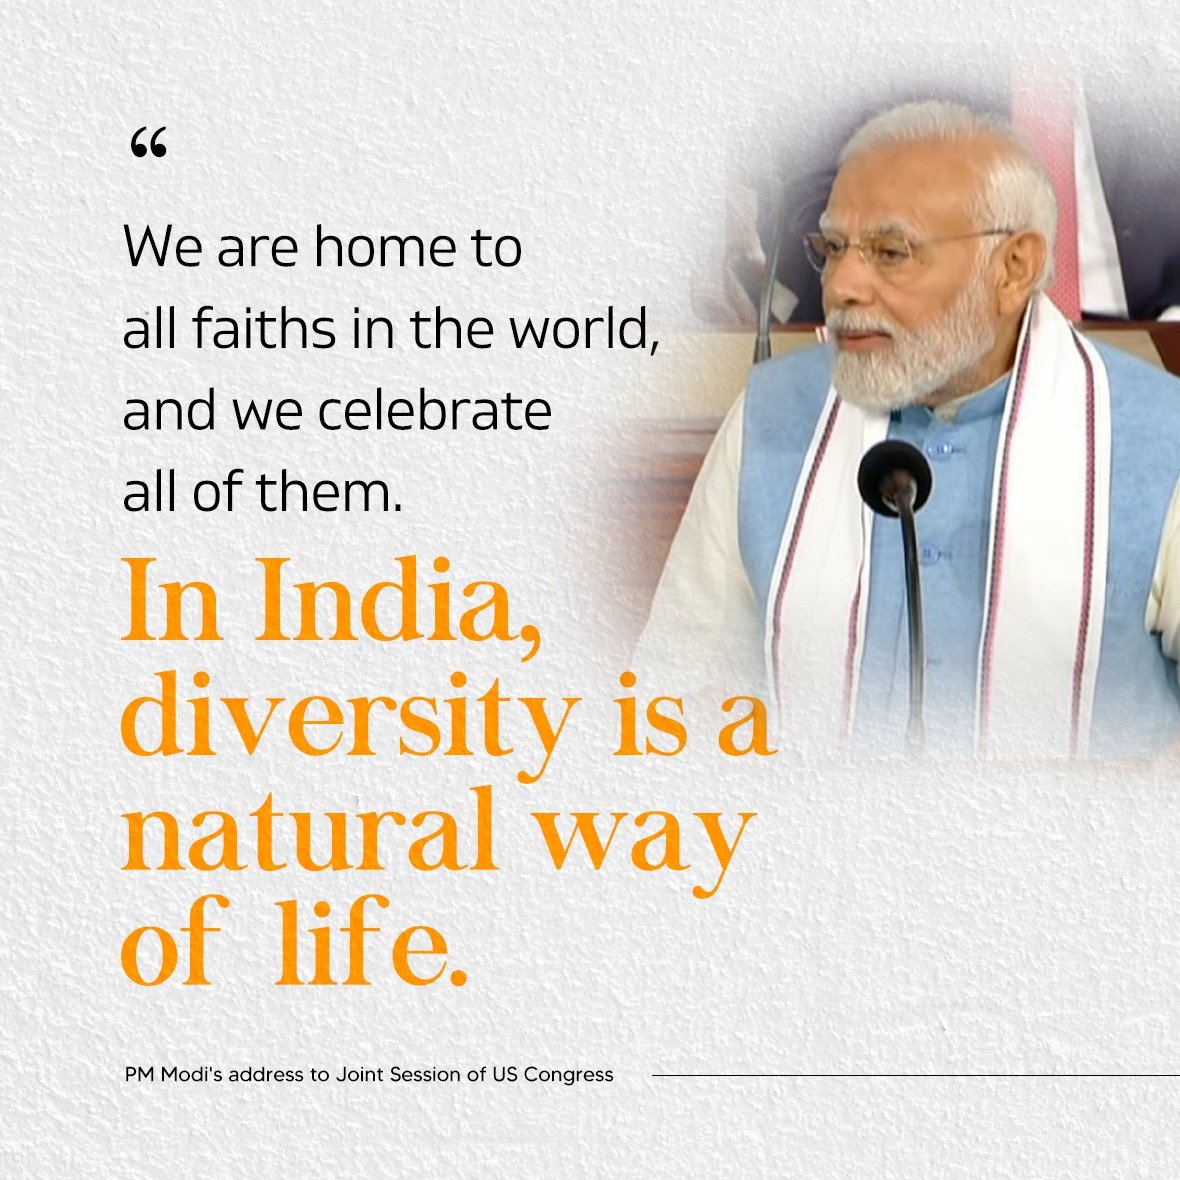 In India, diversity is a natural way of life.